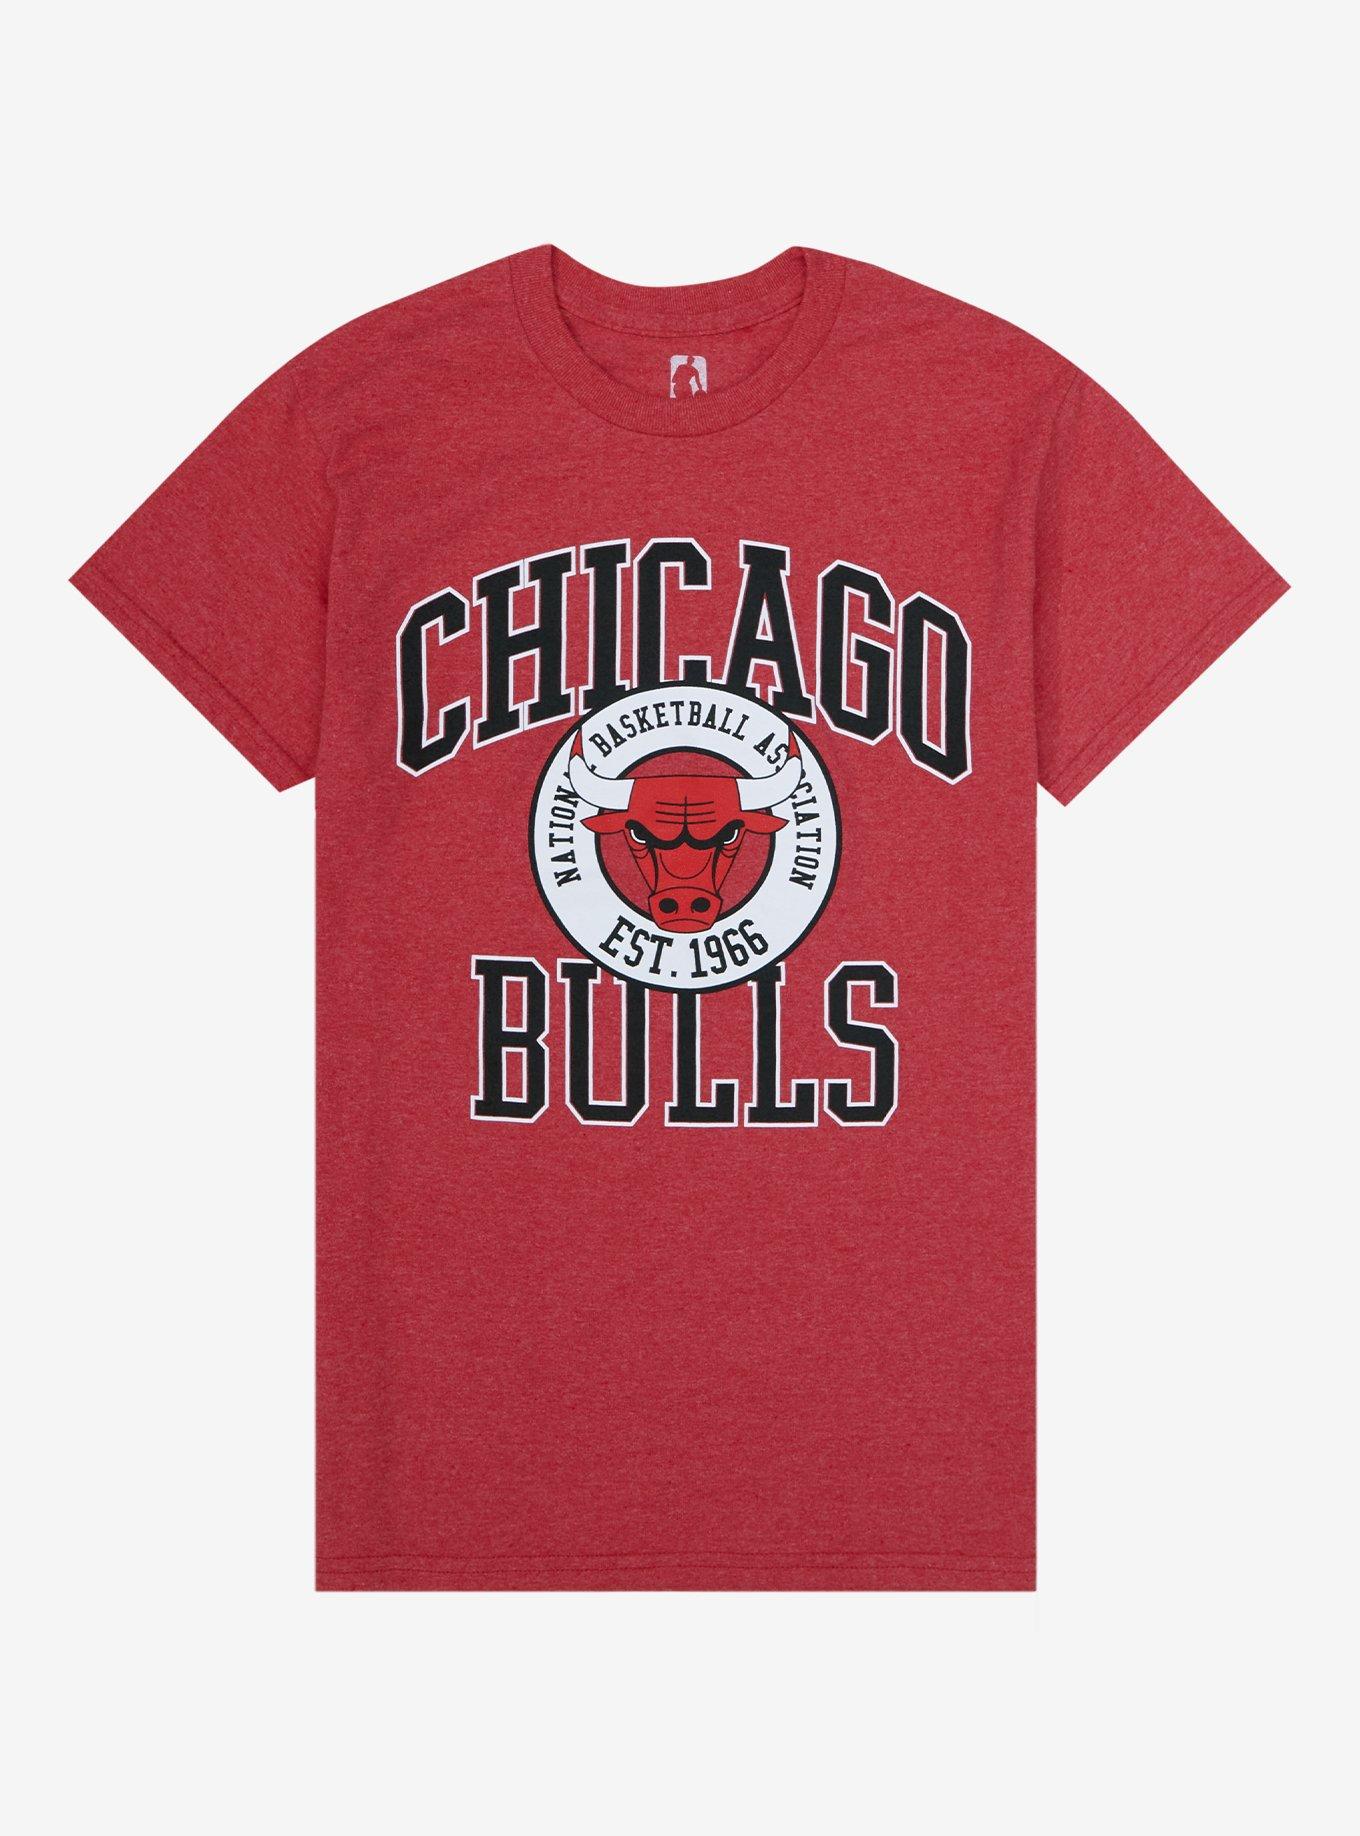 Chicago Bulls NBA Exclusive Collection Women's Team V-Neck T-Shirt -  Heathered Red/White